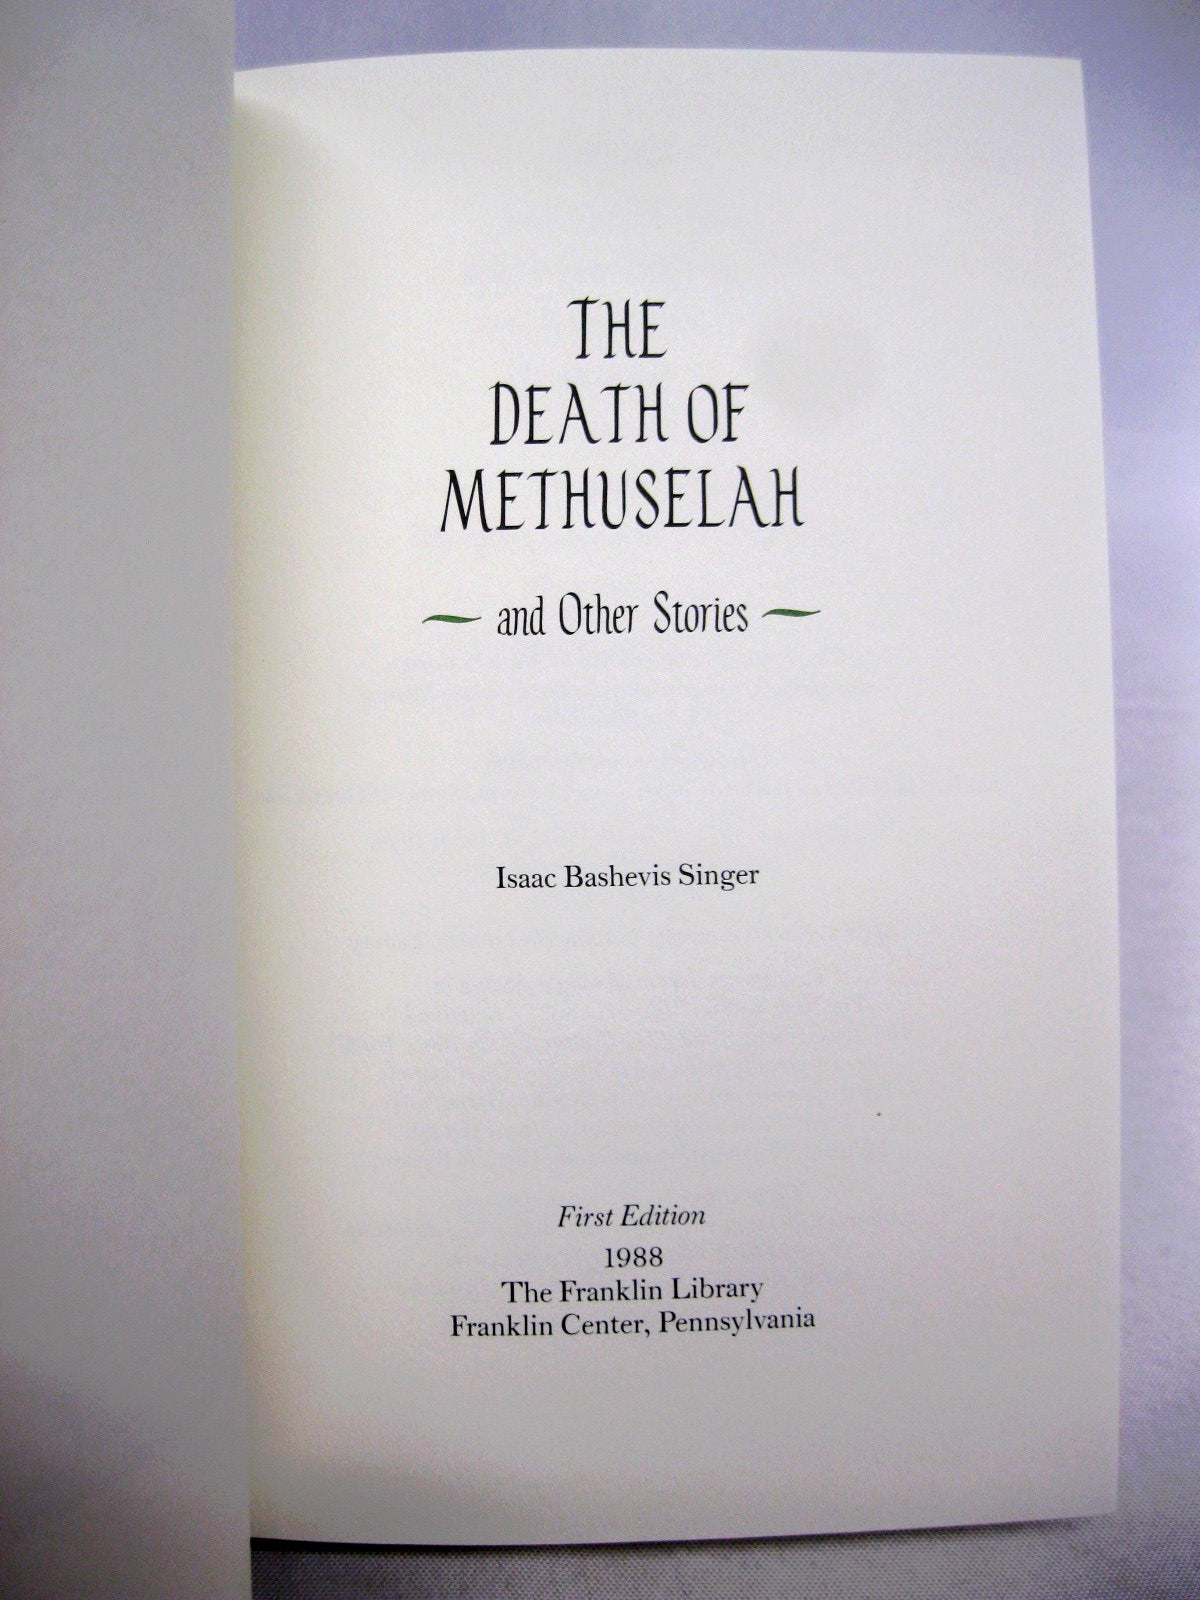 Death of Methusaleh by Isaac Bashevis Singer